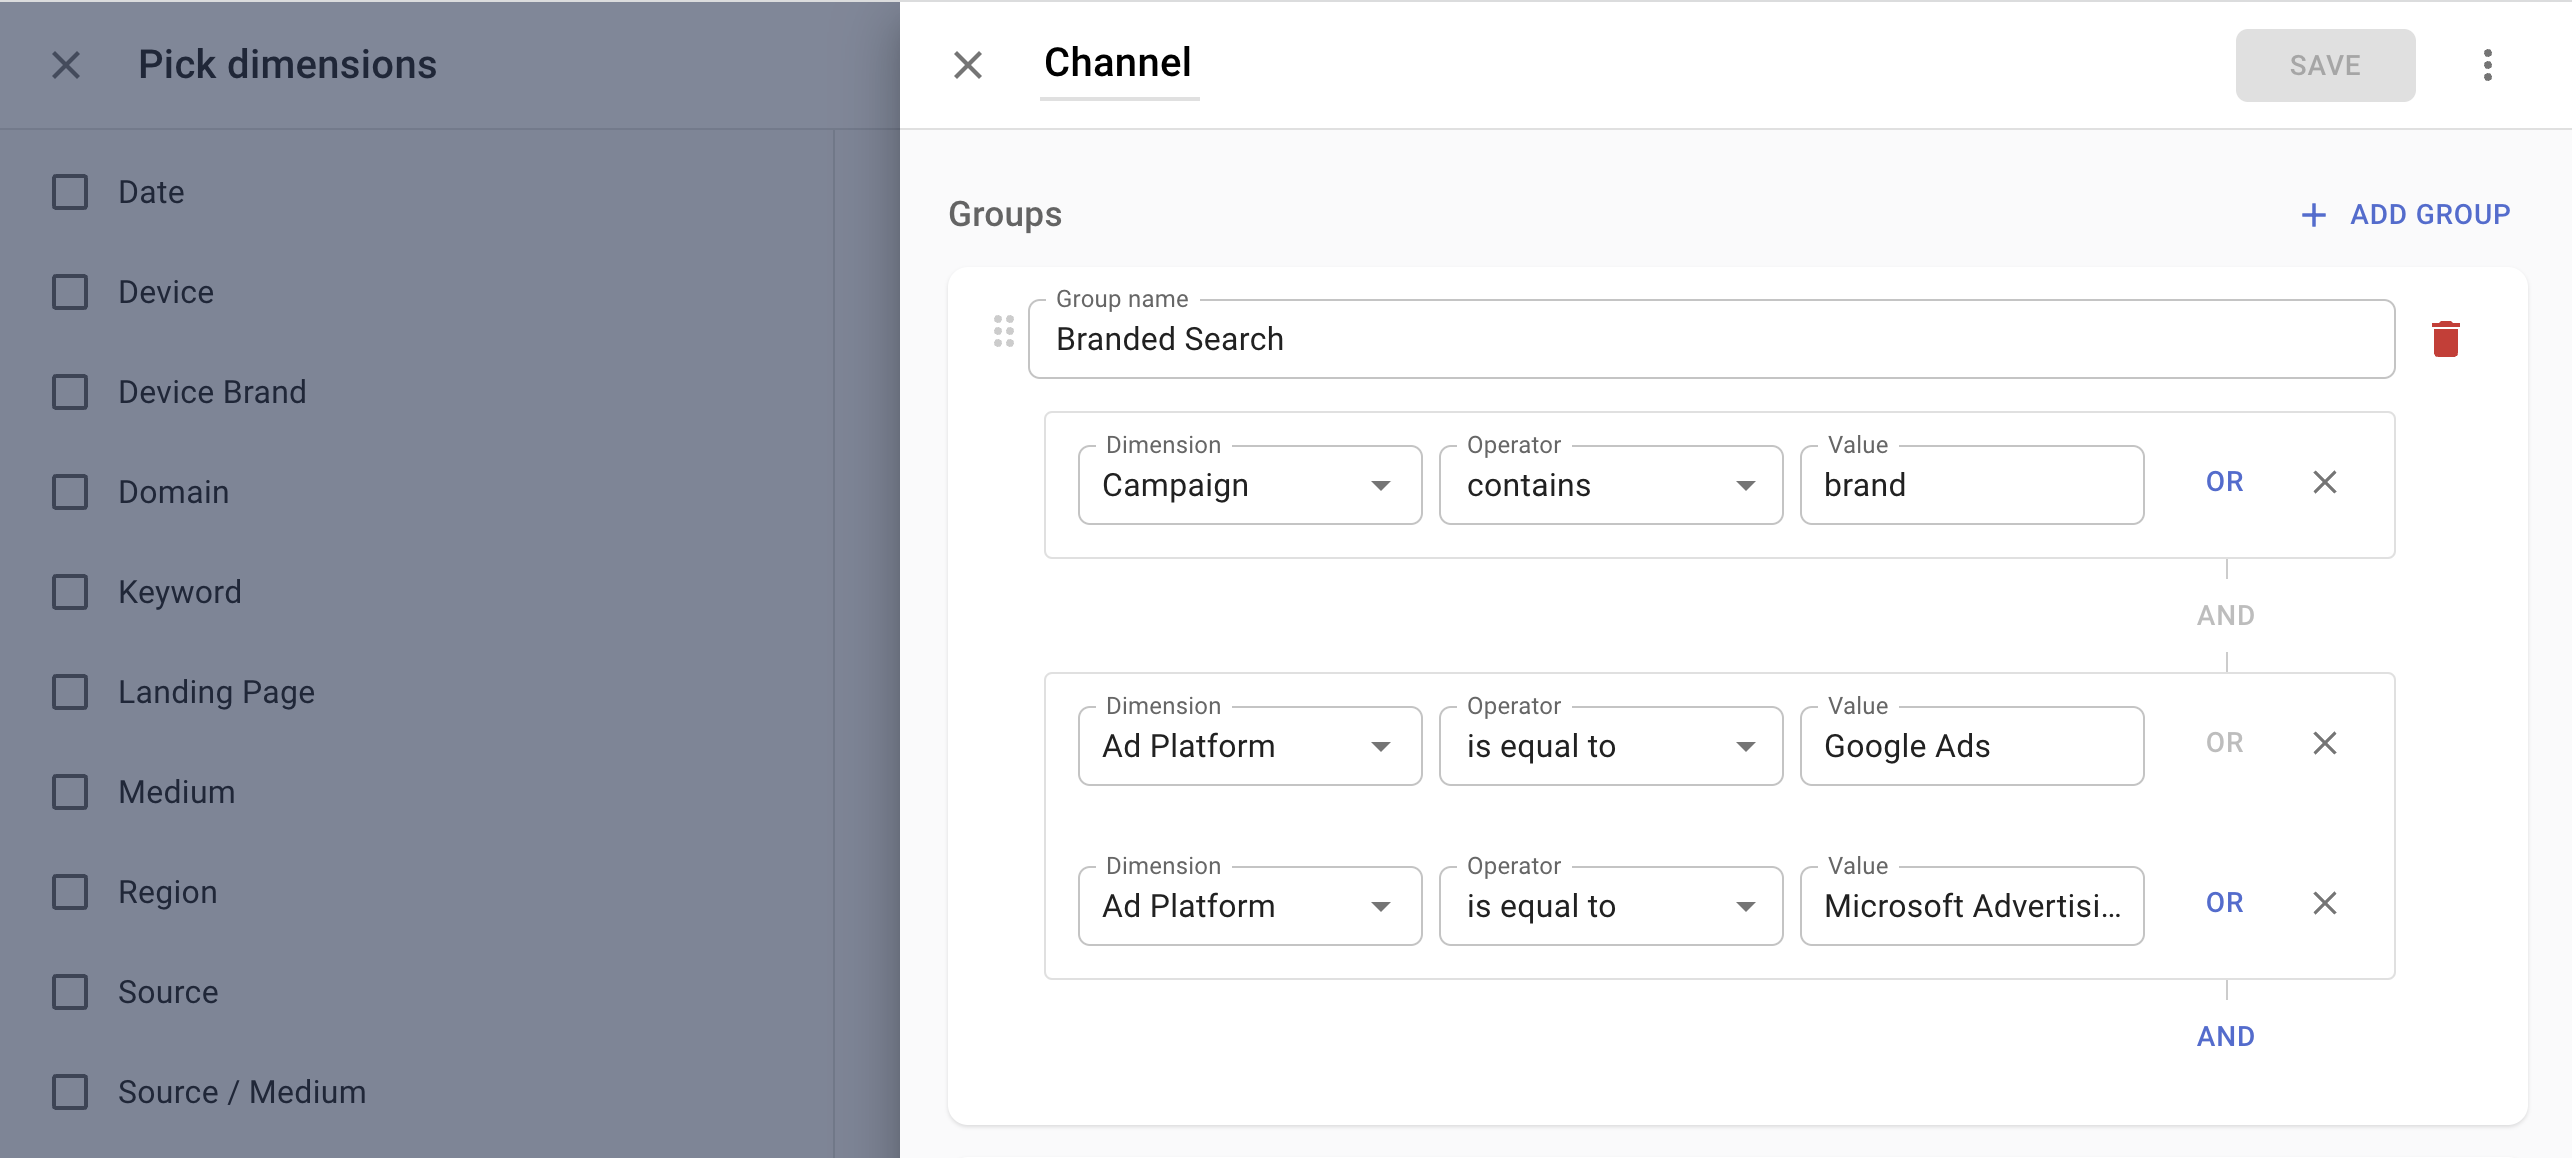 Usecase of the Channel Grouping feature